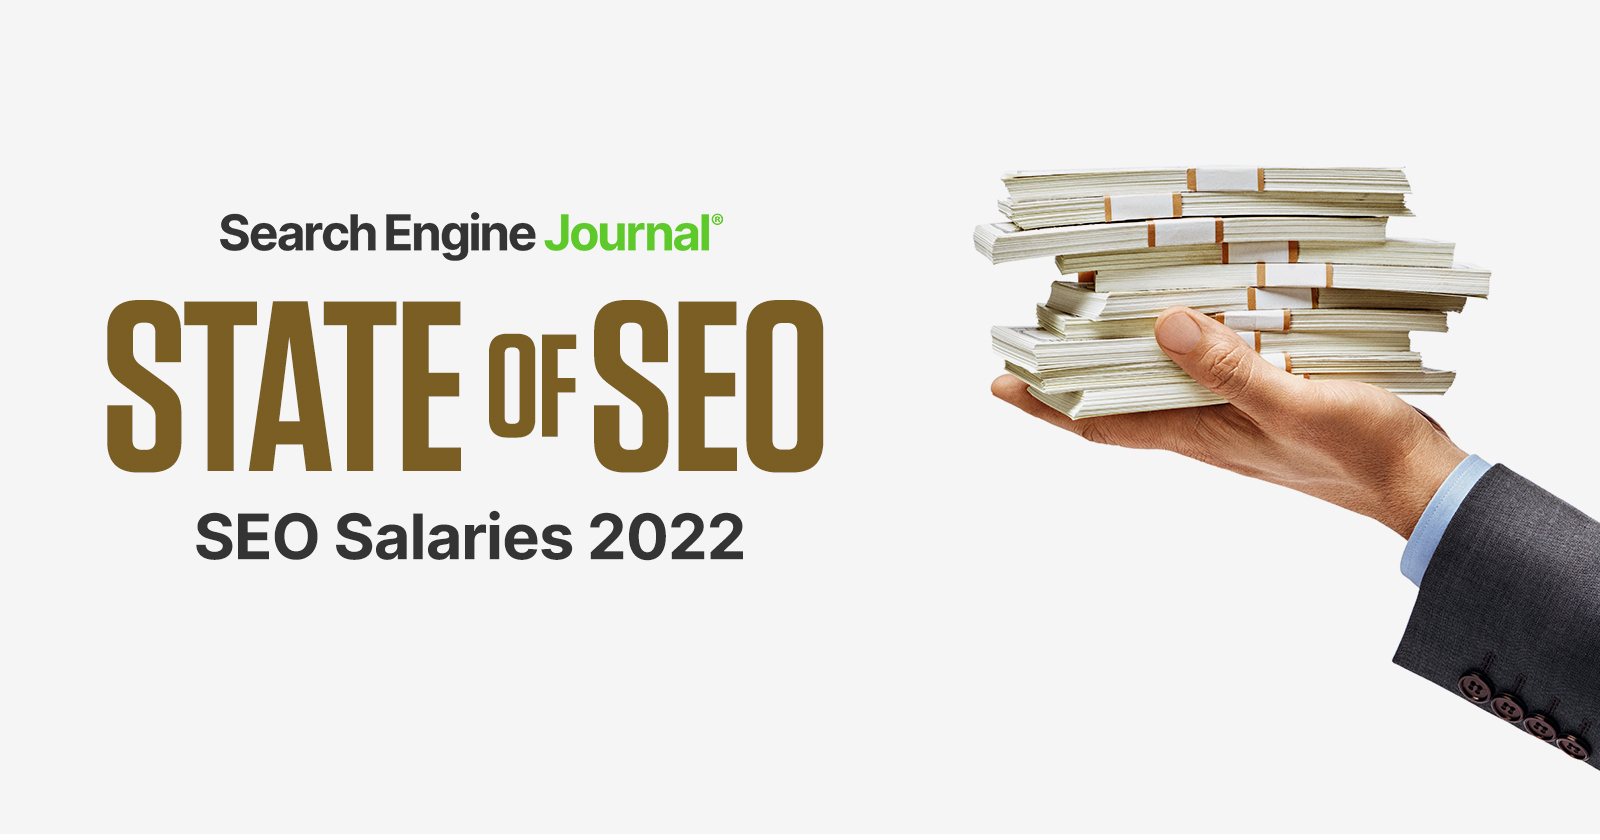 SEO Salaries 2022: Industry Growth & Many New SEO Professionals